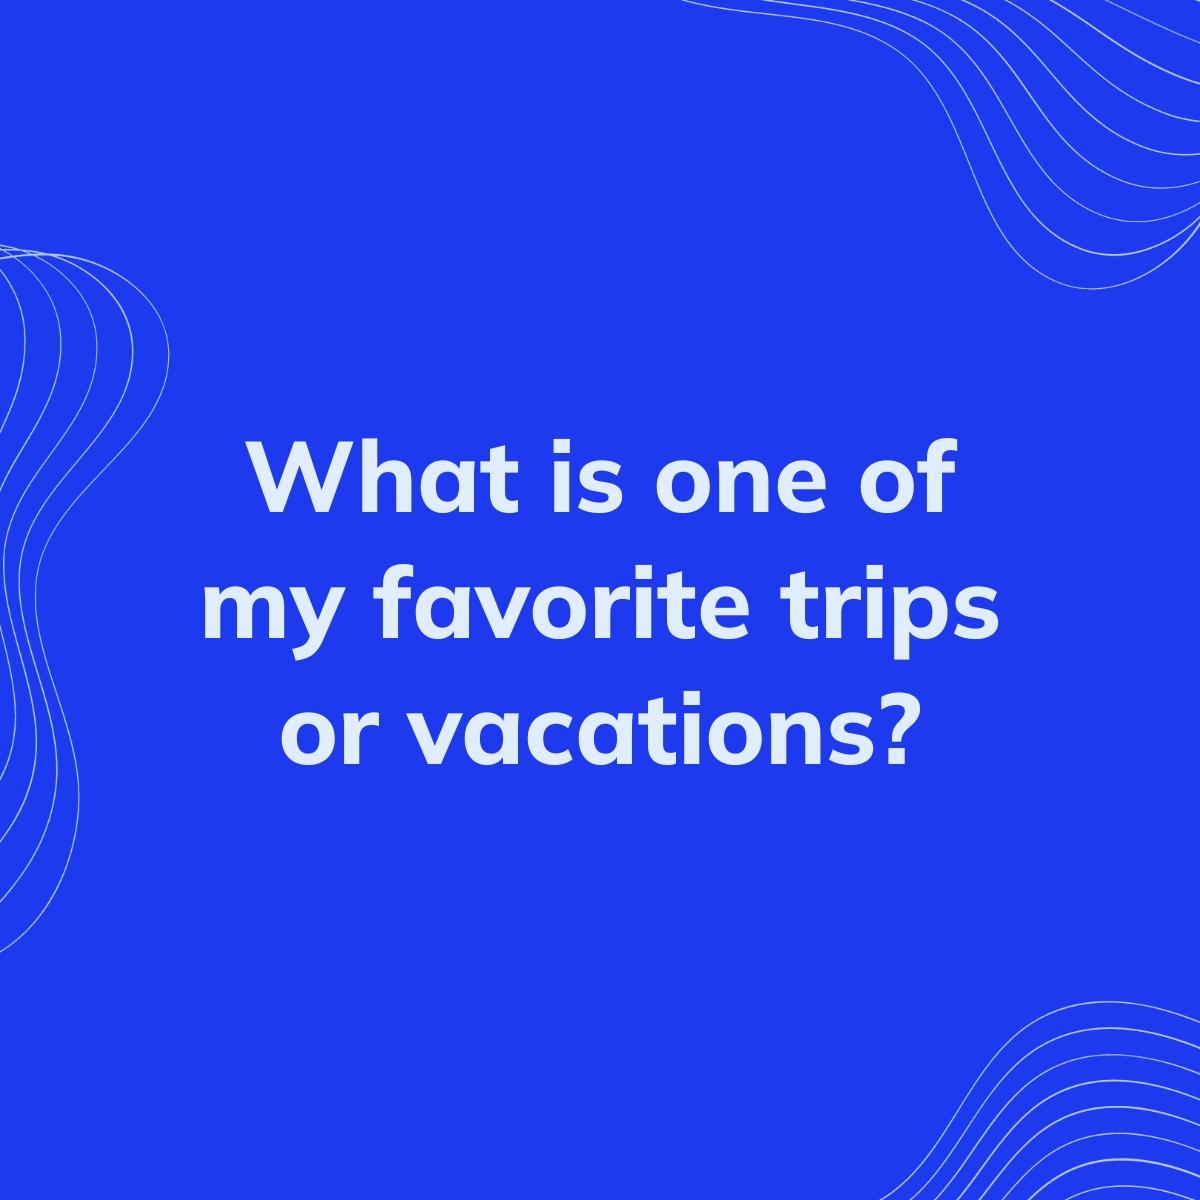 Journal Prompt: What is one of my favorite trips or vacations?